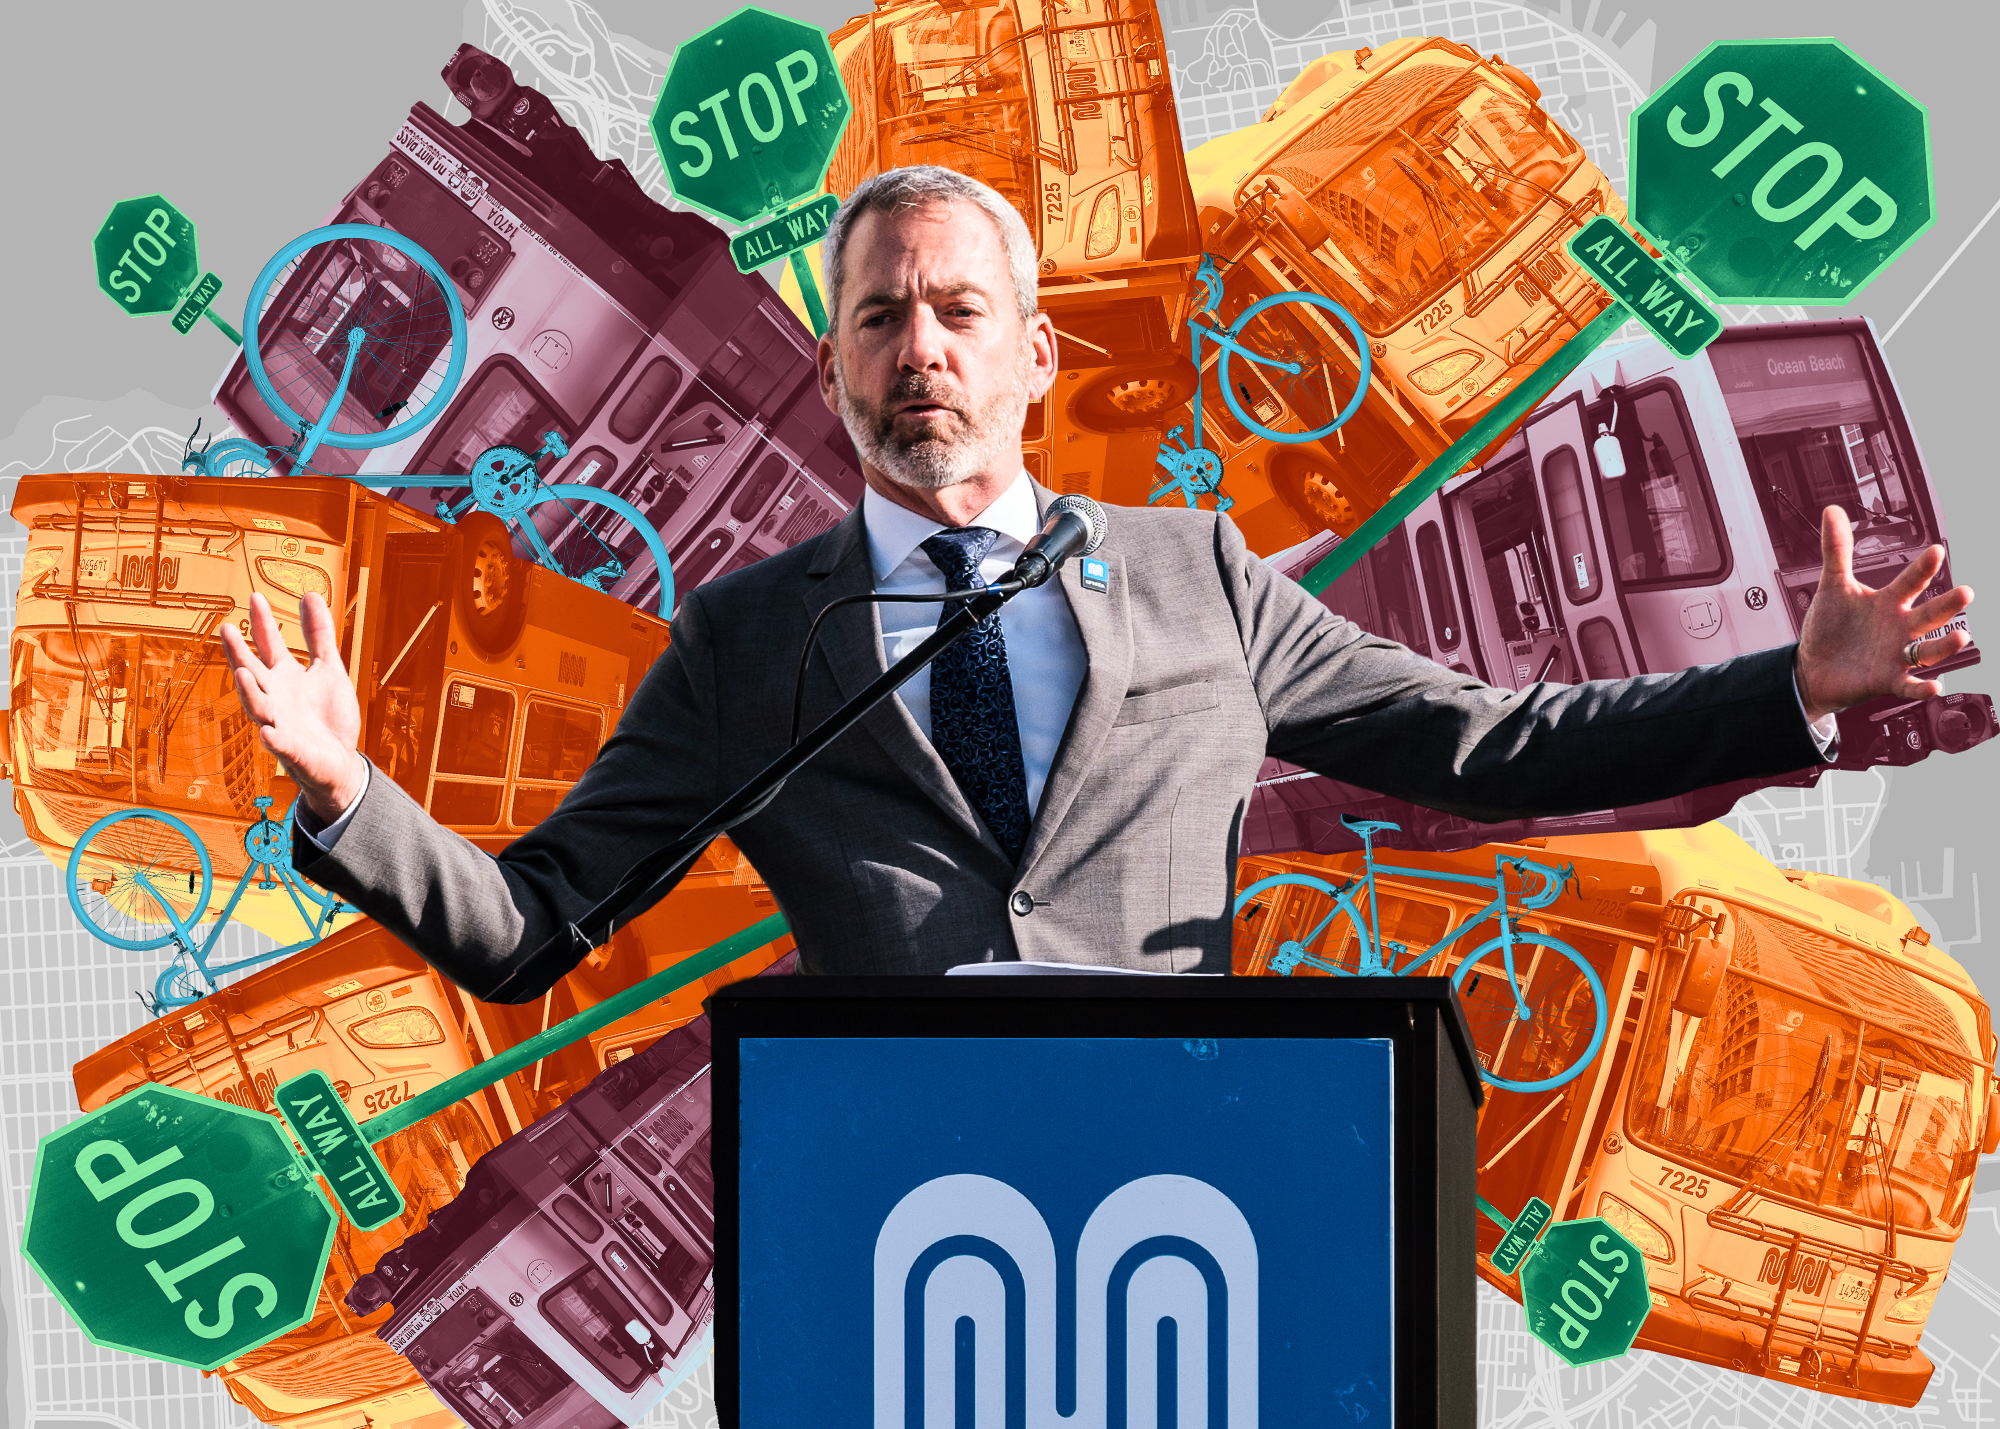 Jeff Tumlin in a suit speaks at a podium, arms outstretched. Behind him, there’s a collage of buses, bicycles, stop signs, and a city map.